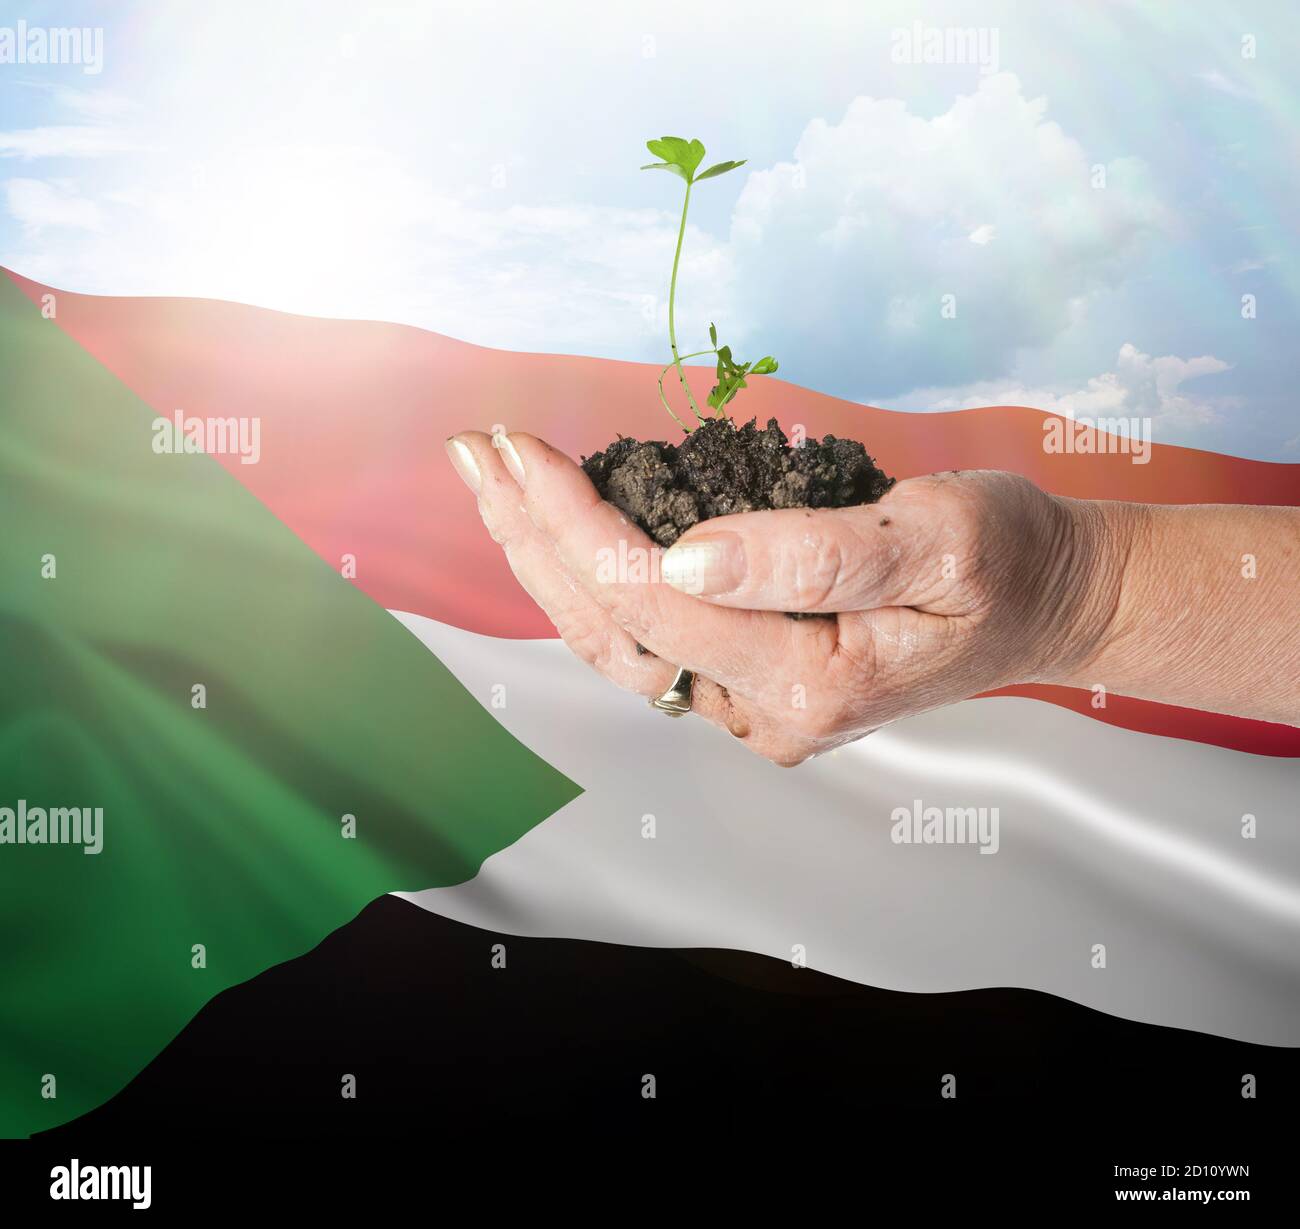 Sudan growth and new beginning. Green renewable energy and ecology concept. Hand holding young plant. Stock Photo